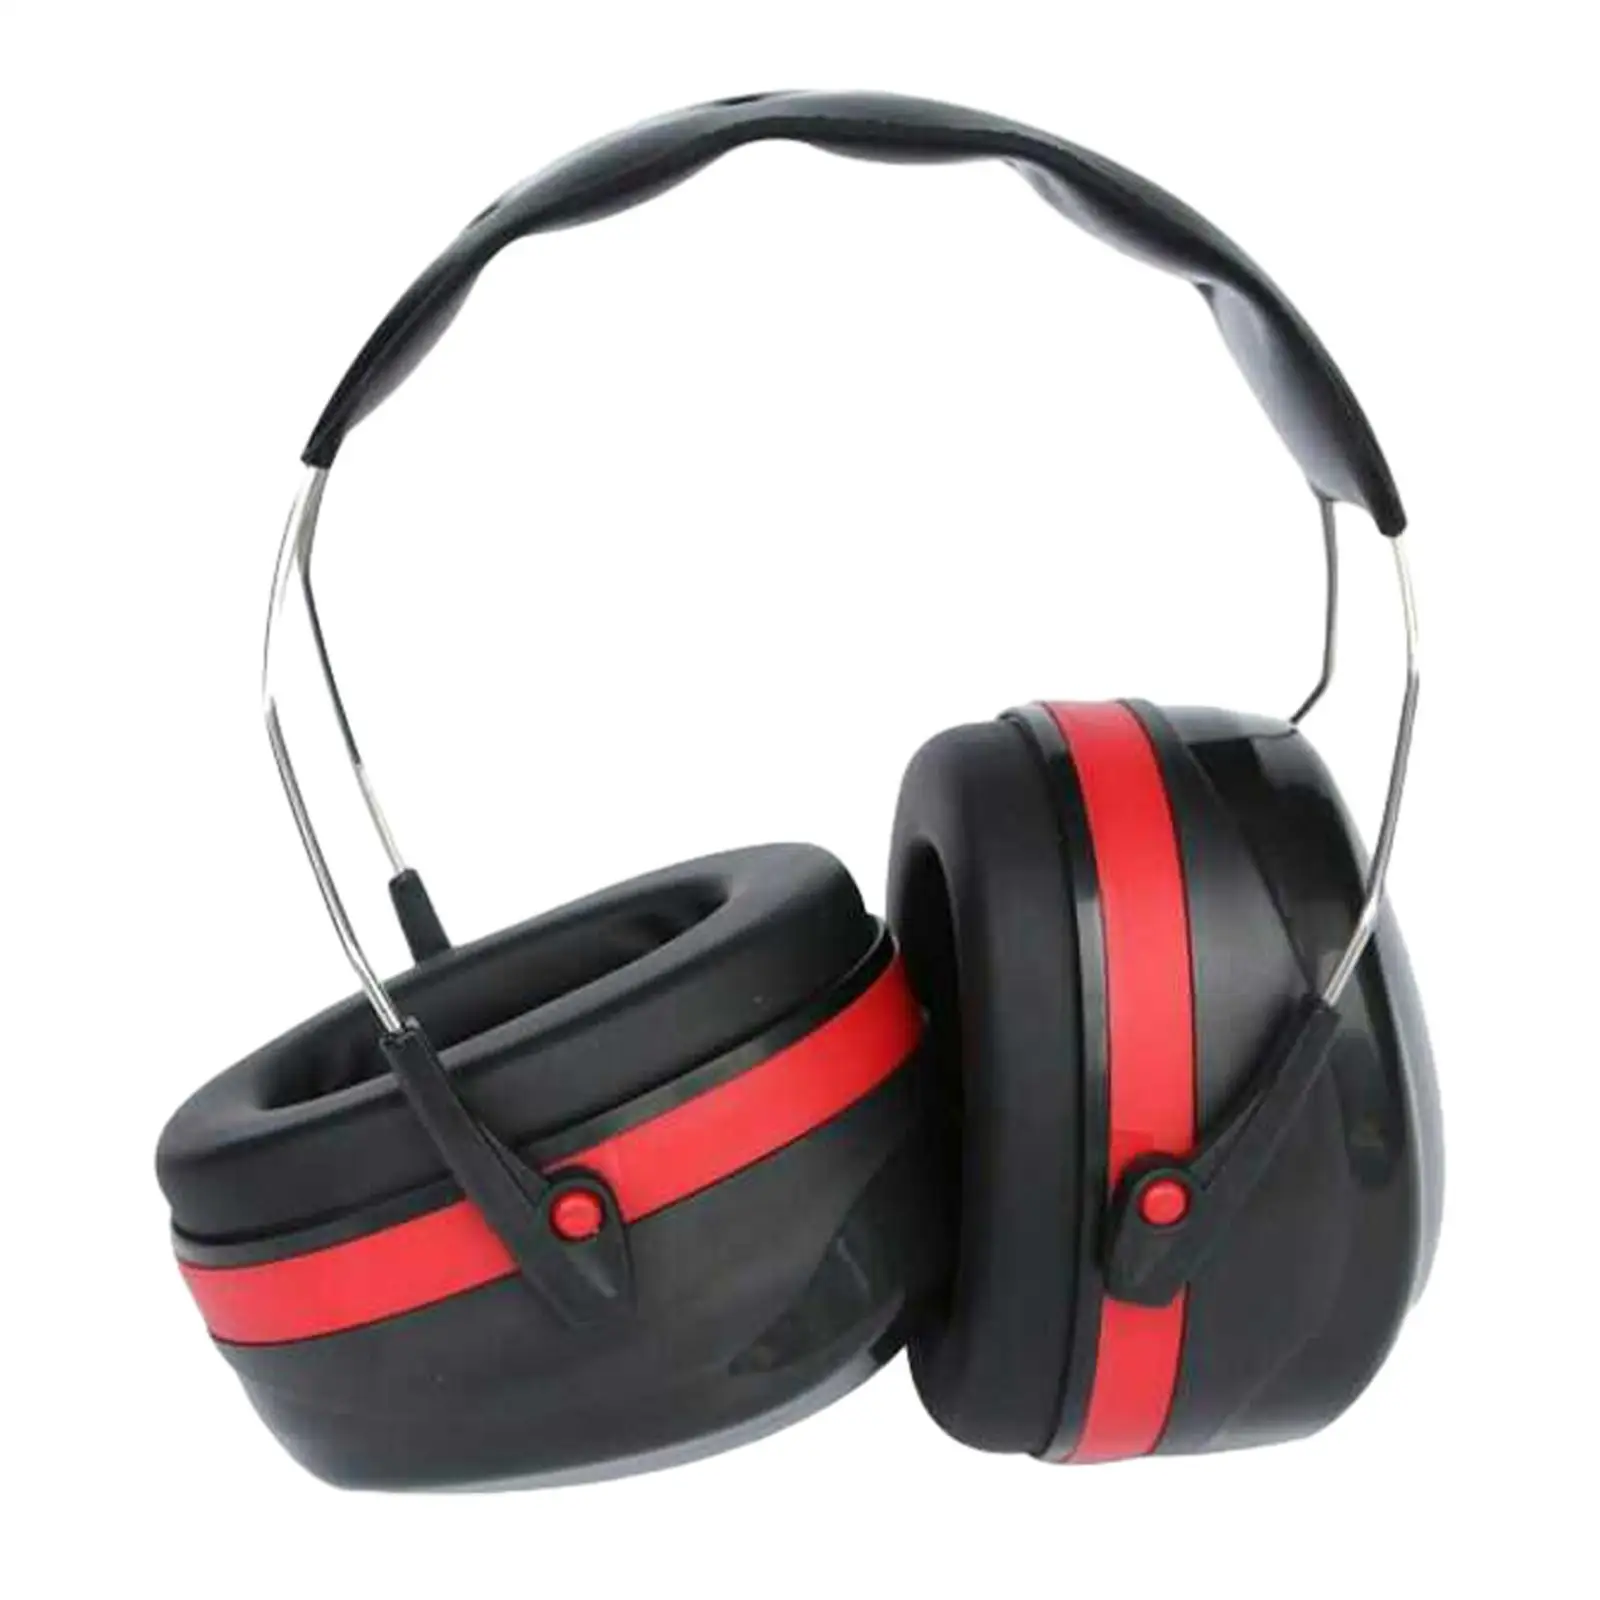 Noise Reduction Headphones Sound Blocking Adjustable Headband Noise Cancelling for Workshop Sleeping Mowing Lawn Study Drum